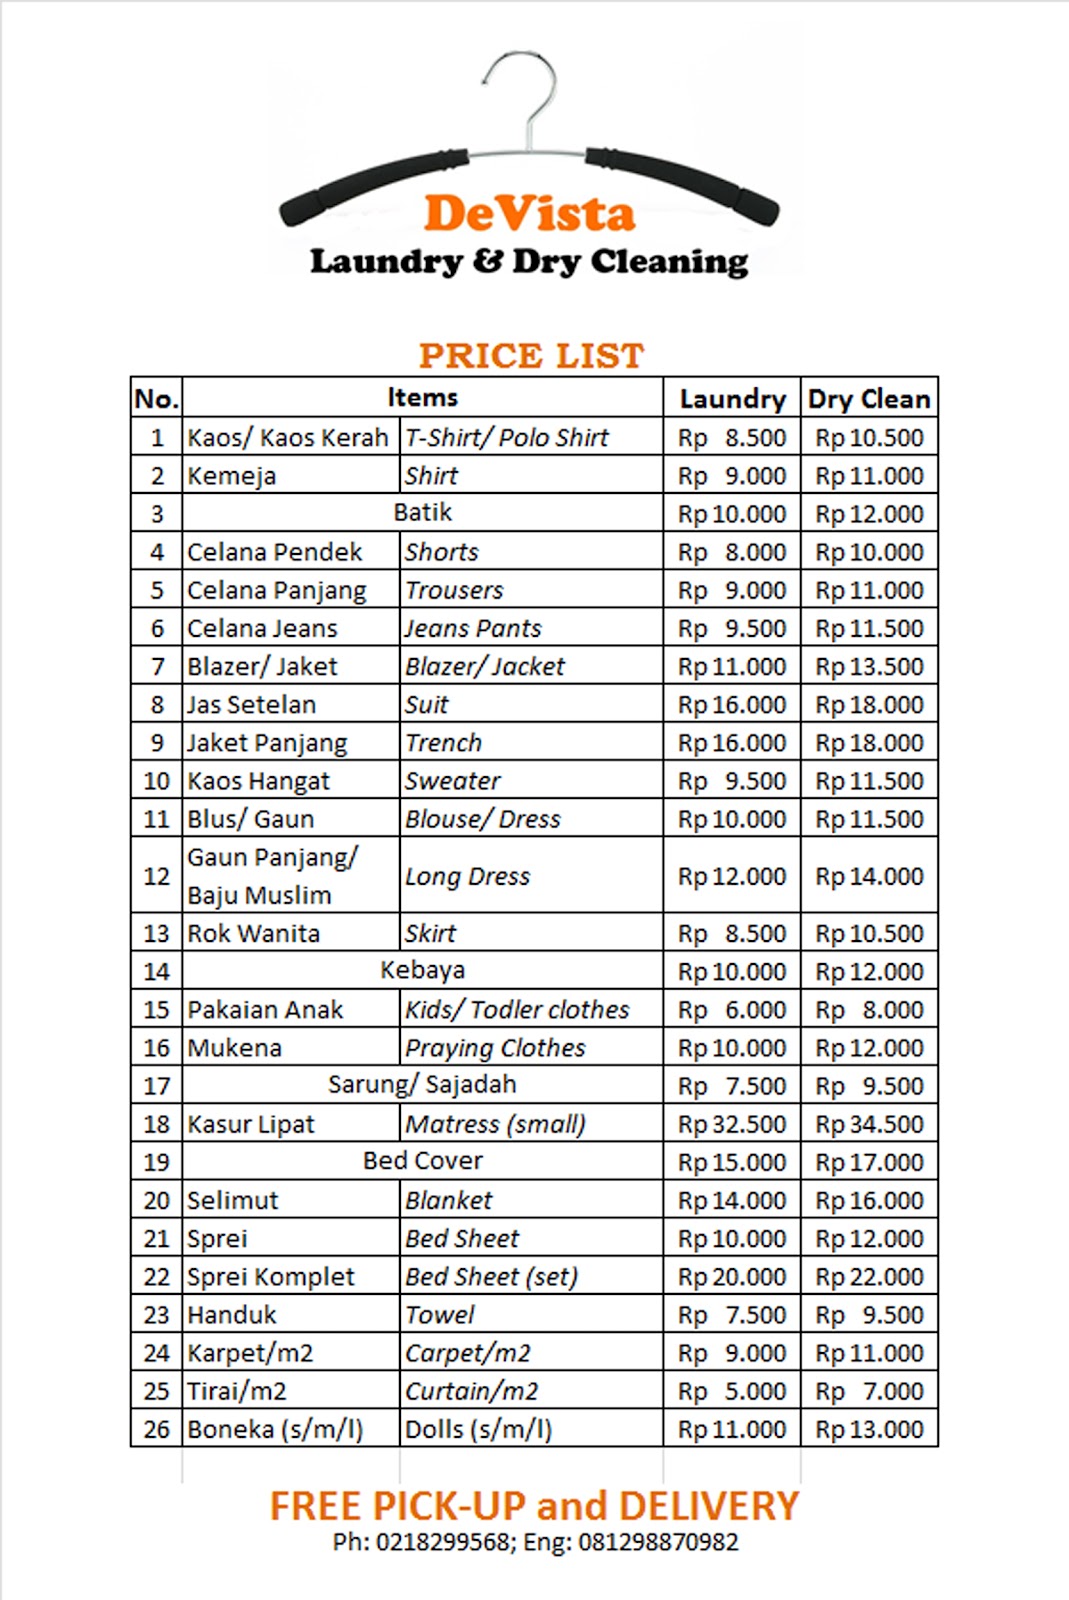 Laundry and Dry Clean at Rasuna: Laundry and Dry Clean Price List